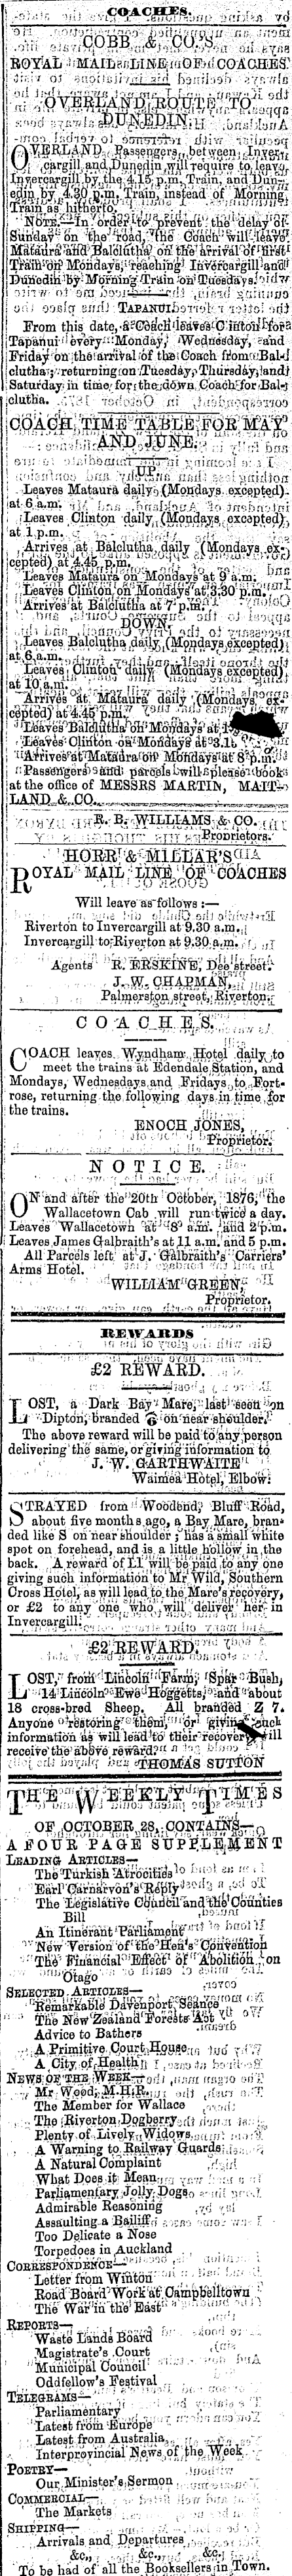 Papers Past Newspapers Southland Times 1 November 1876 Page 4 Advertisements Column 7